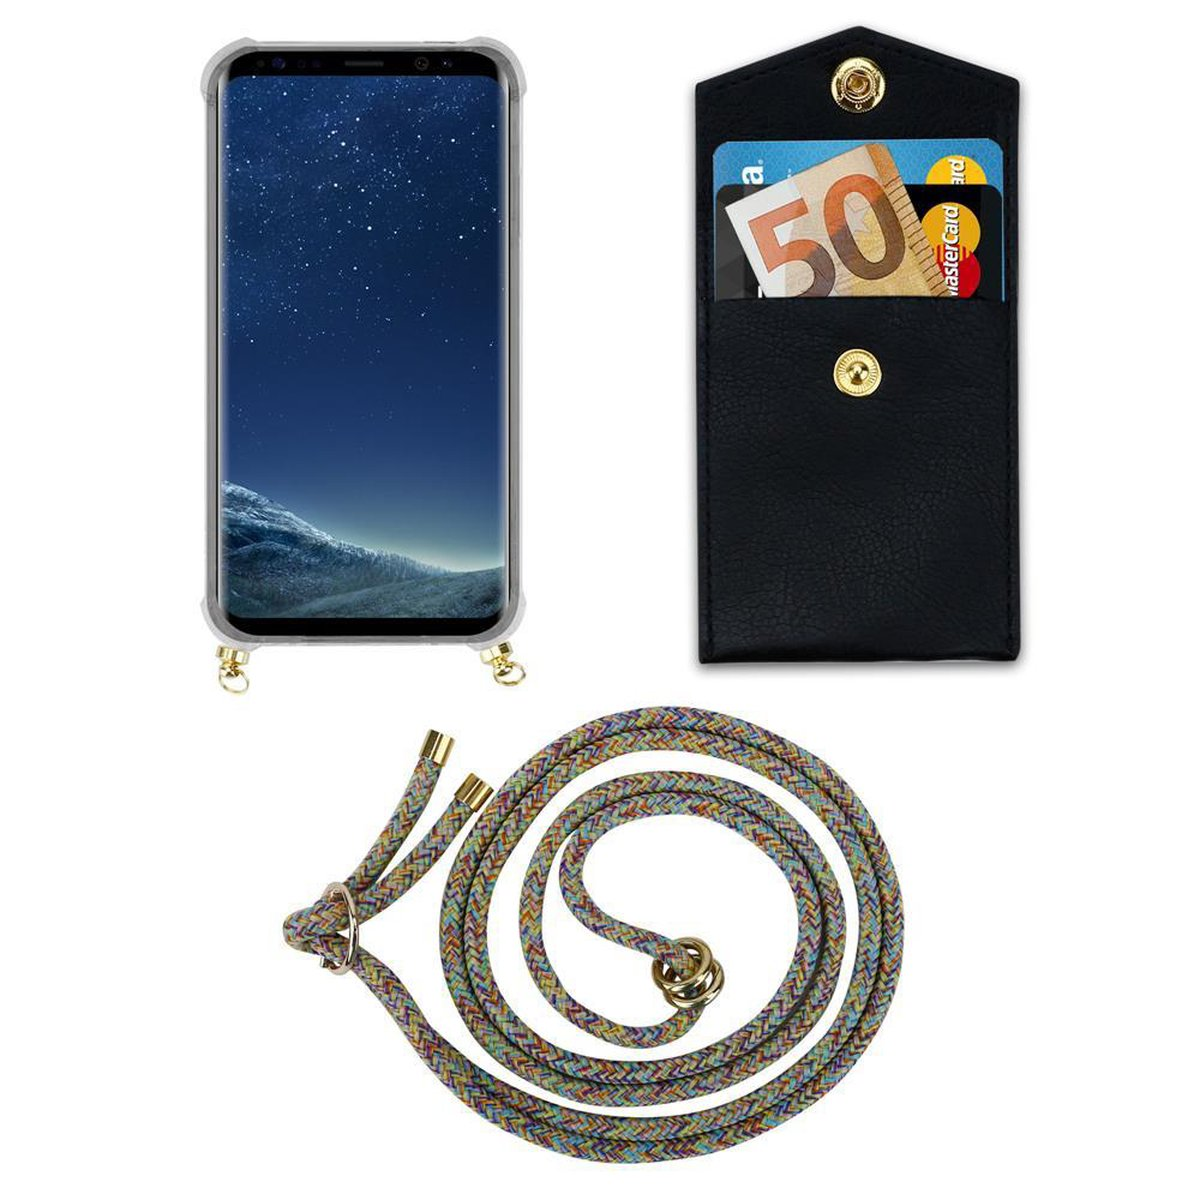 CADORABO Handy Samsung, RAINBOW S8, und Band Gold Hülle, Kette Galaxy Kordel Backcover, Ringen, mit abnehmbarer